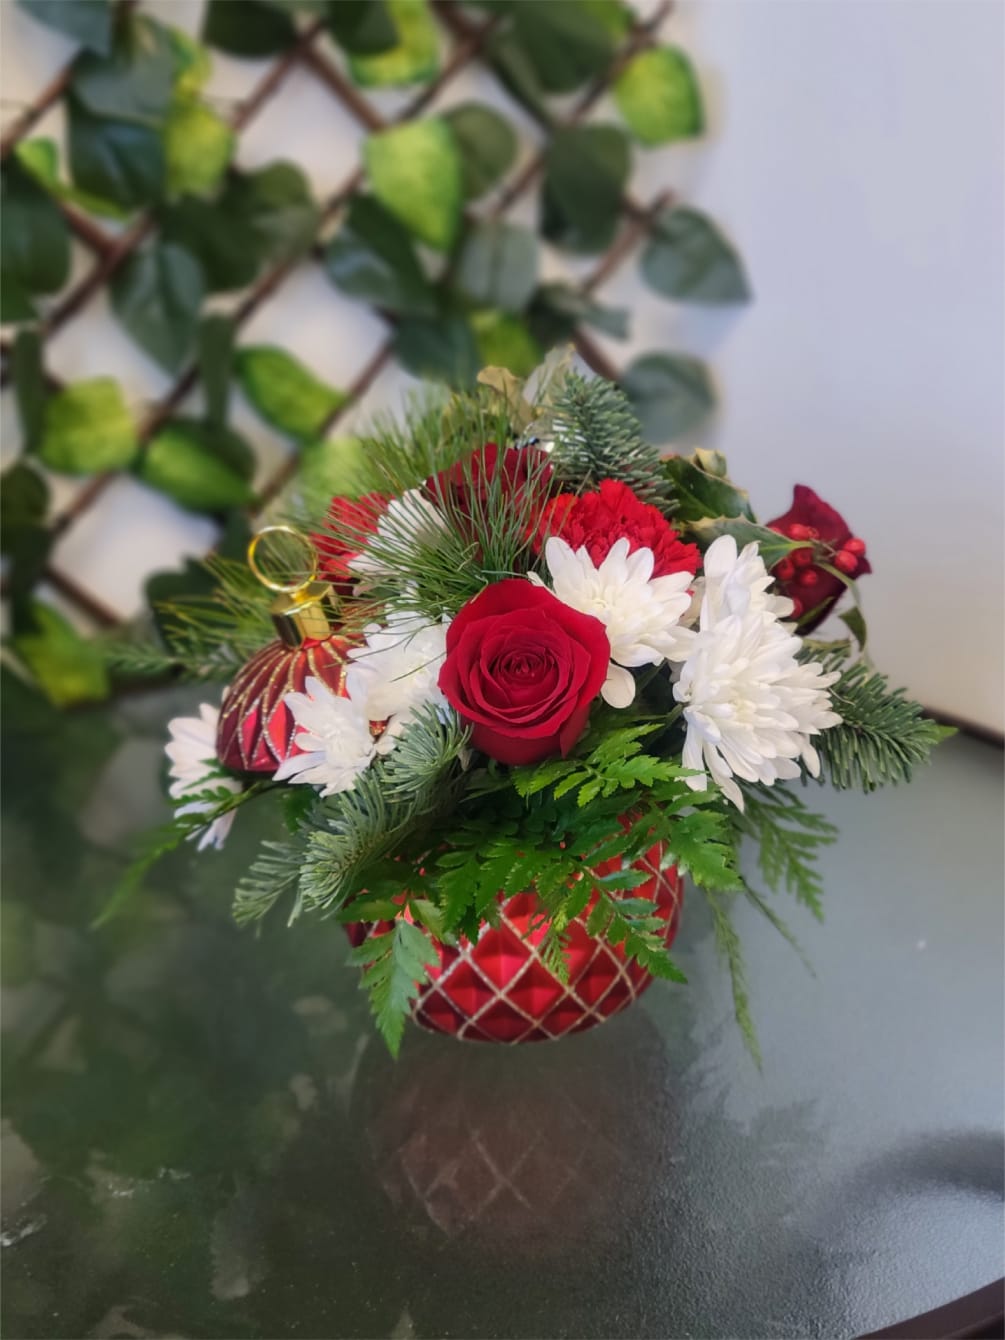 Beautiful Christmas arrangement with a variety of flowers of the occasion

Similar colors